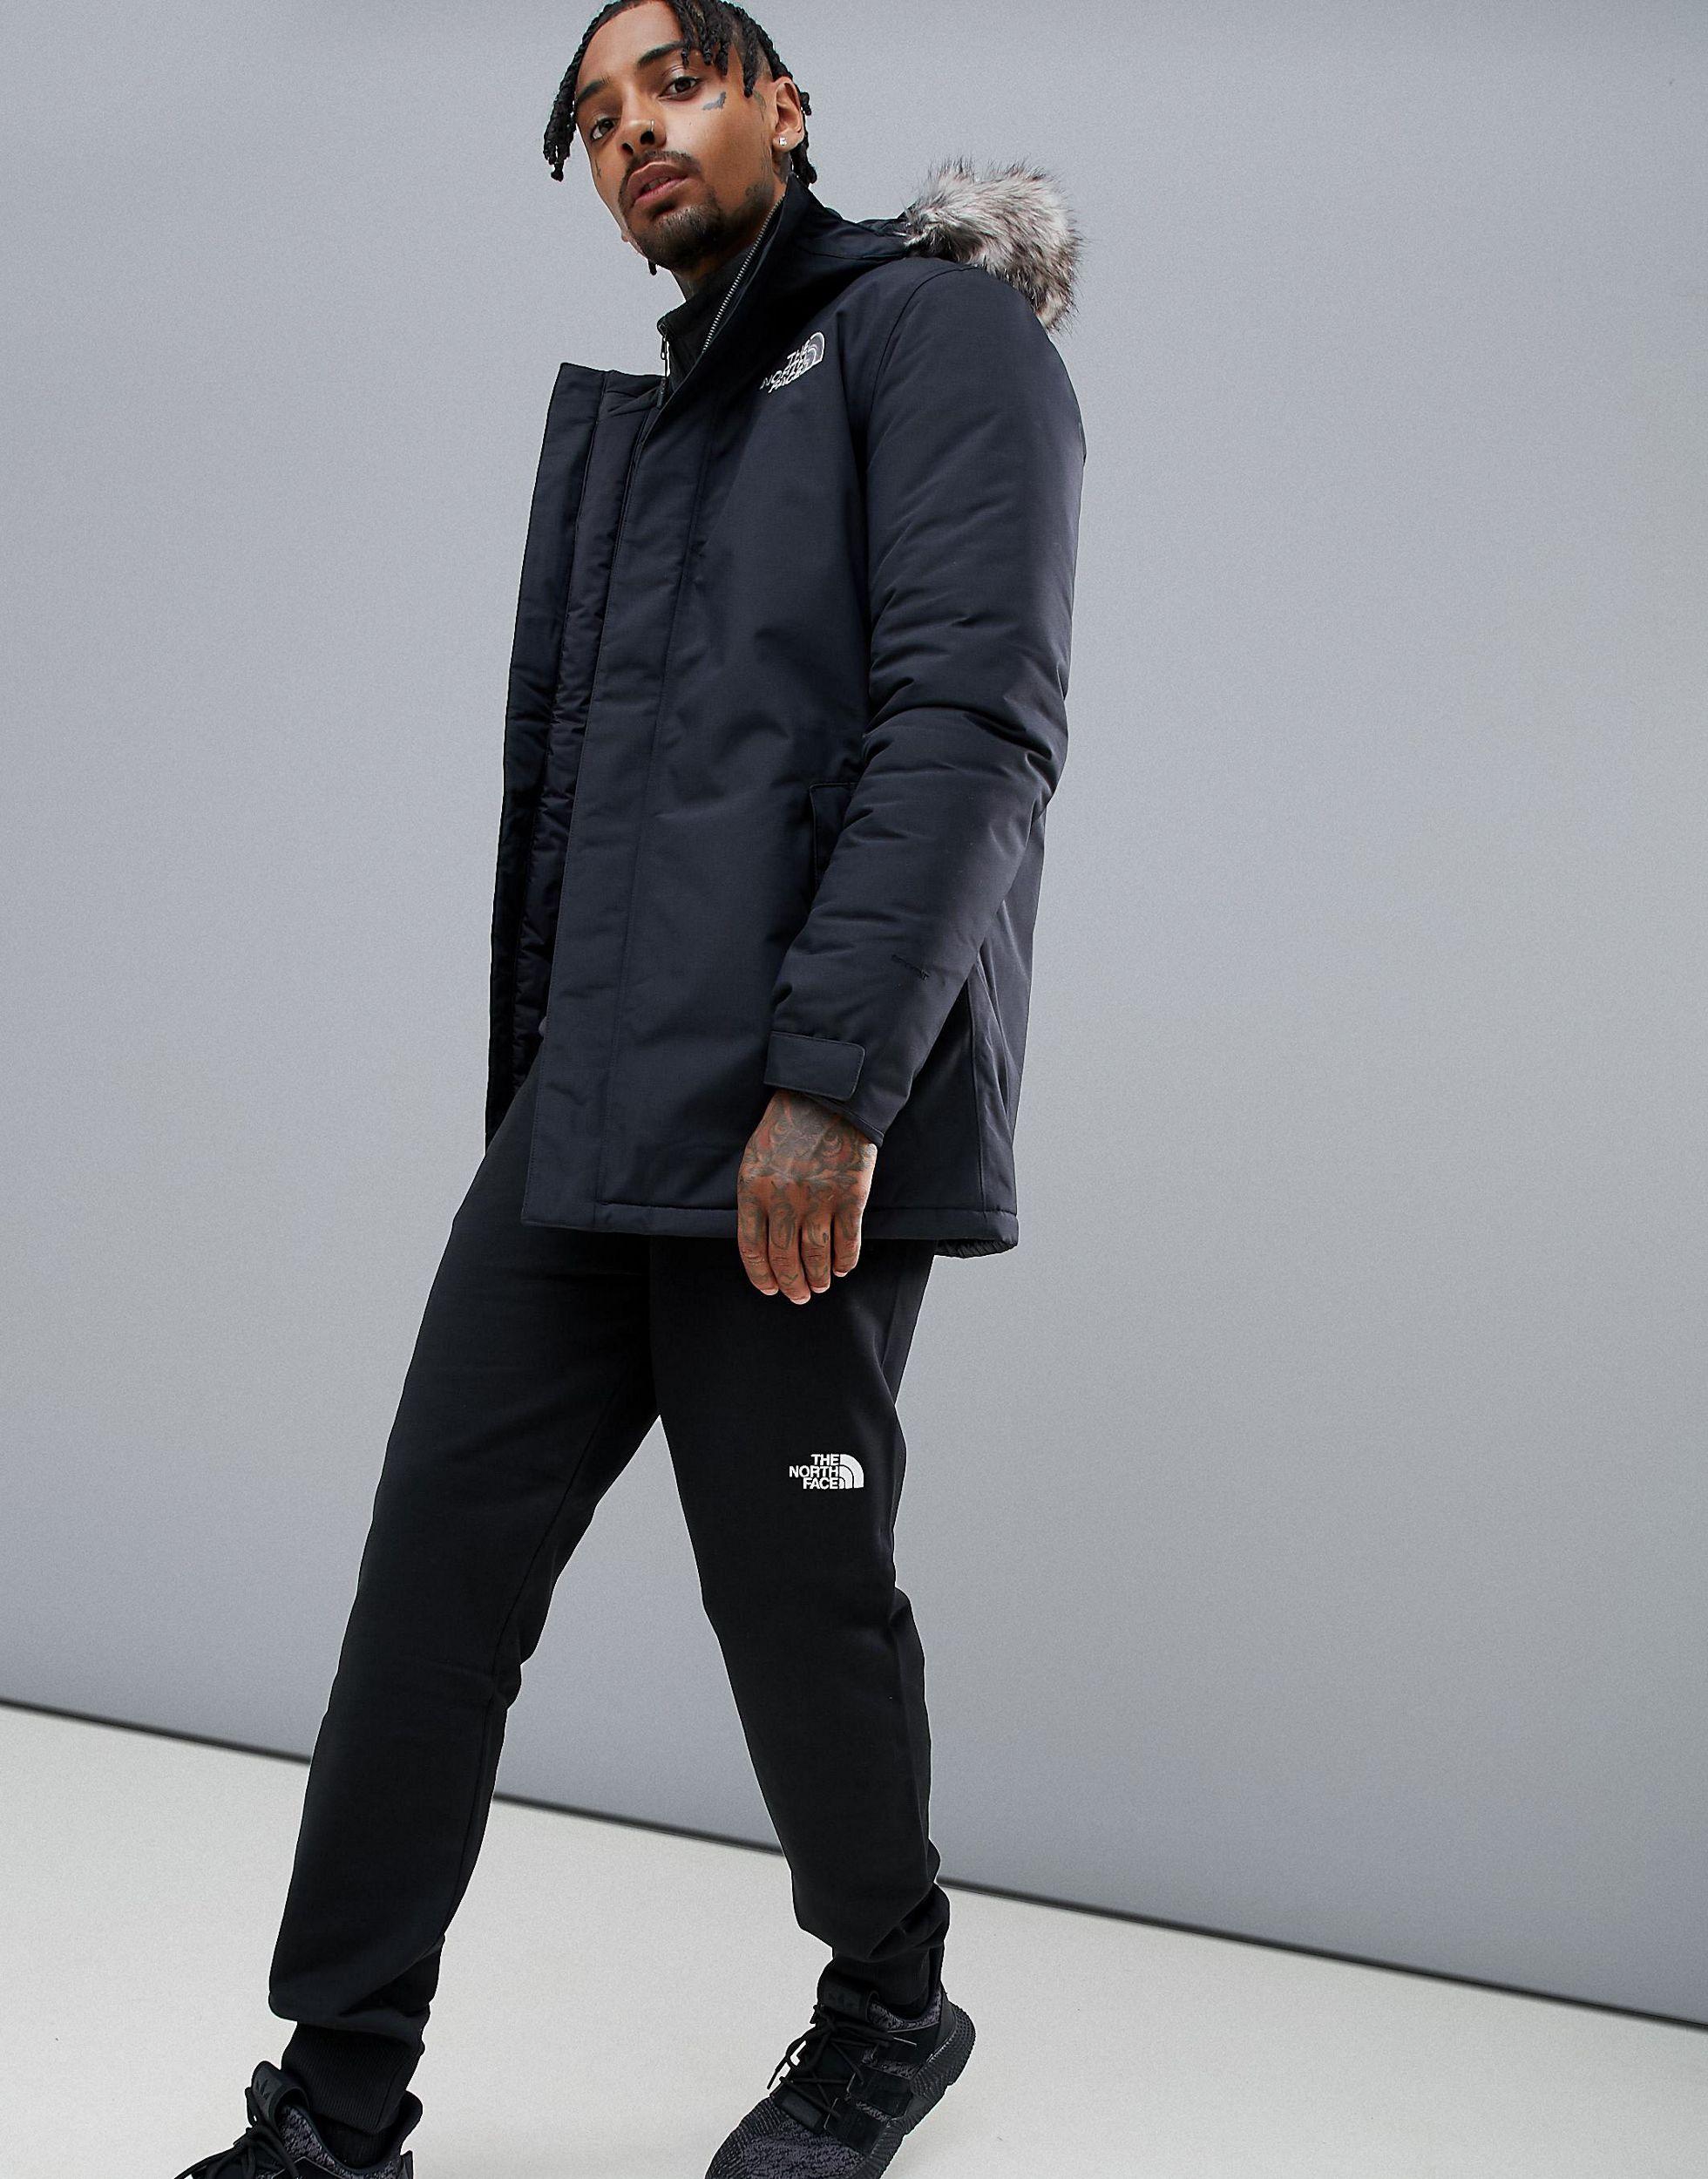 The North Face Synthetic Zaneck Jacket in Black for Men - Lyst